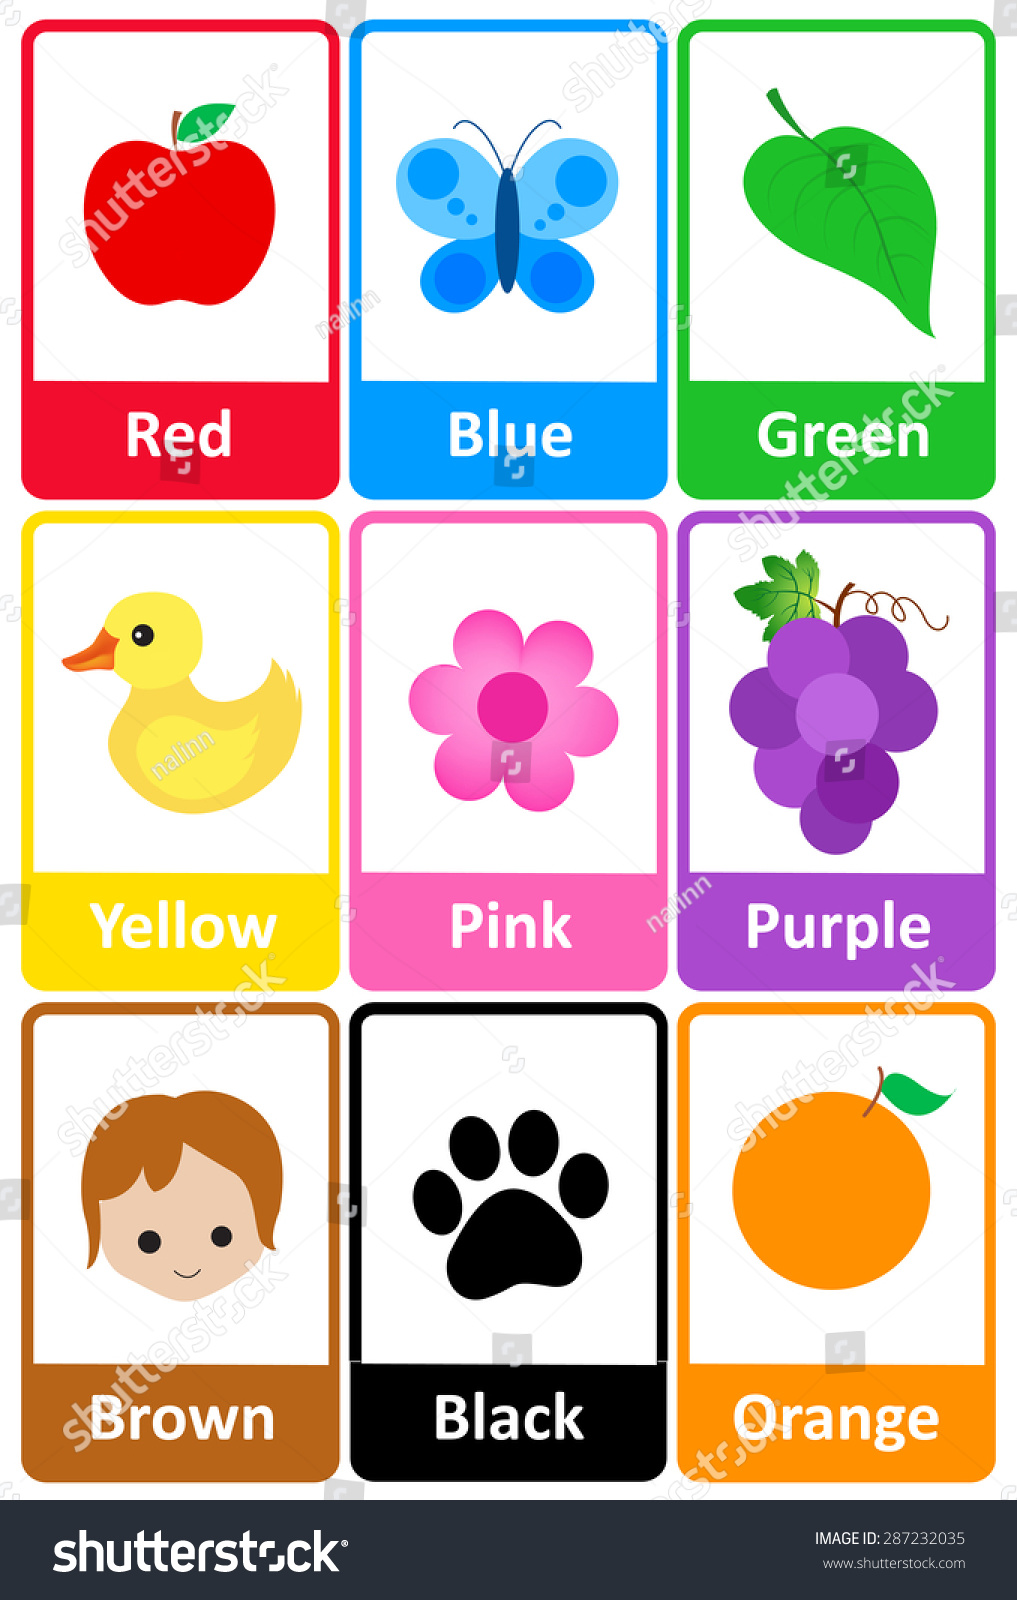 Printable Flash Card Collection For Colors And Royalty Free Stock 